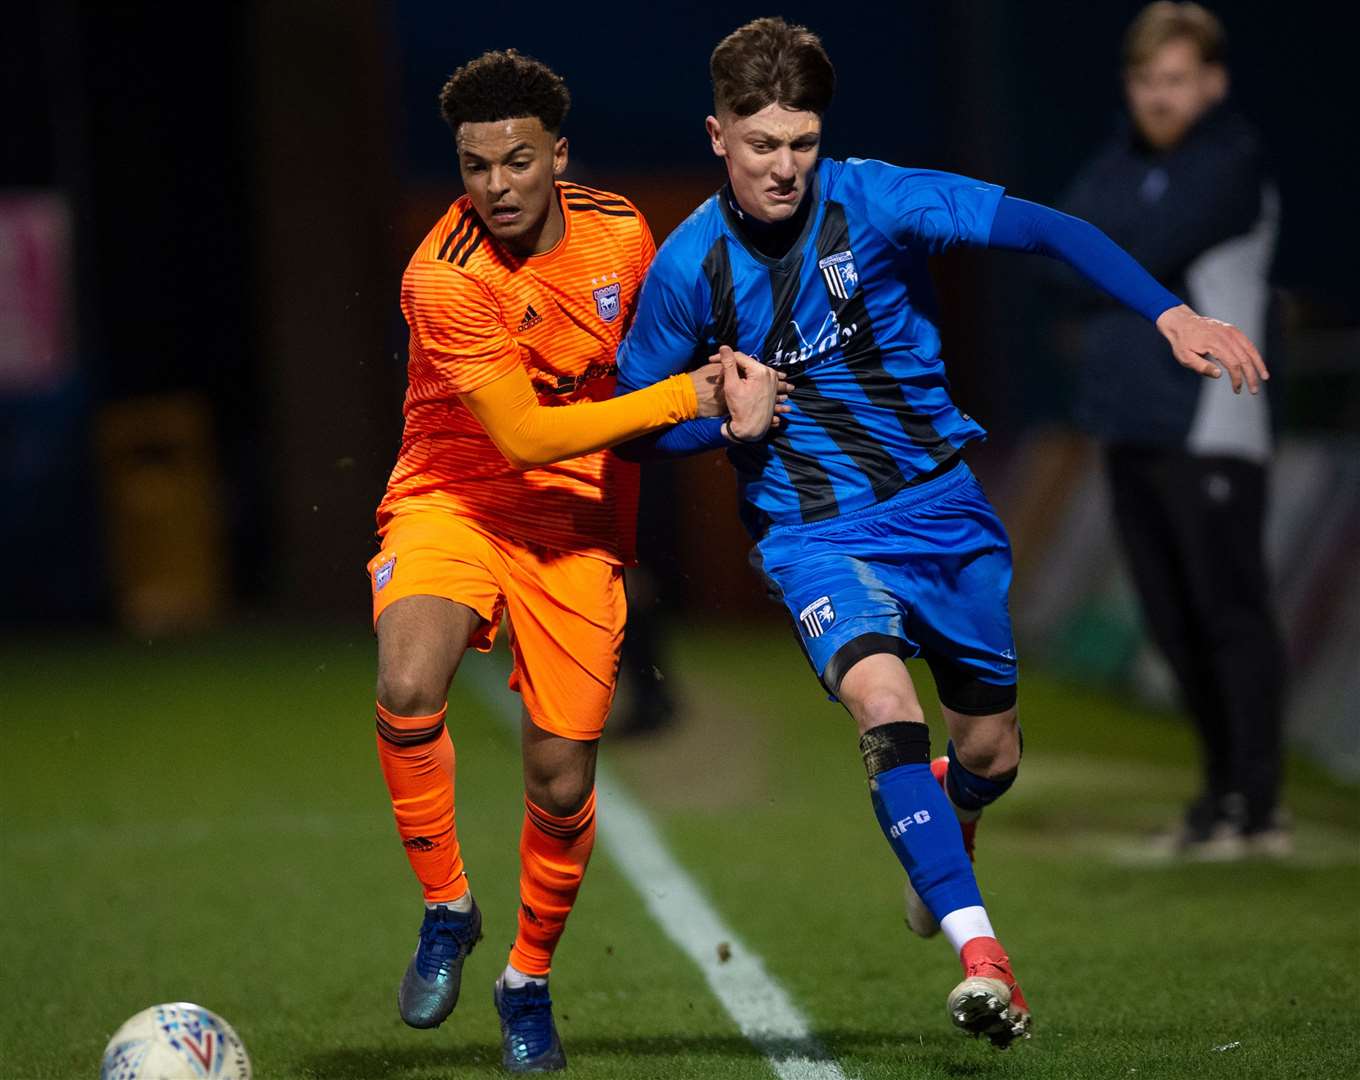 Toby Bancroft in FA Youth Cup action for Gillingham